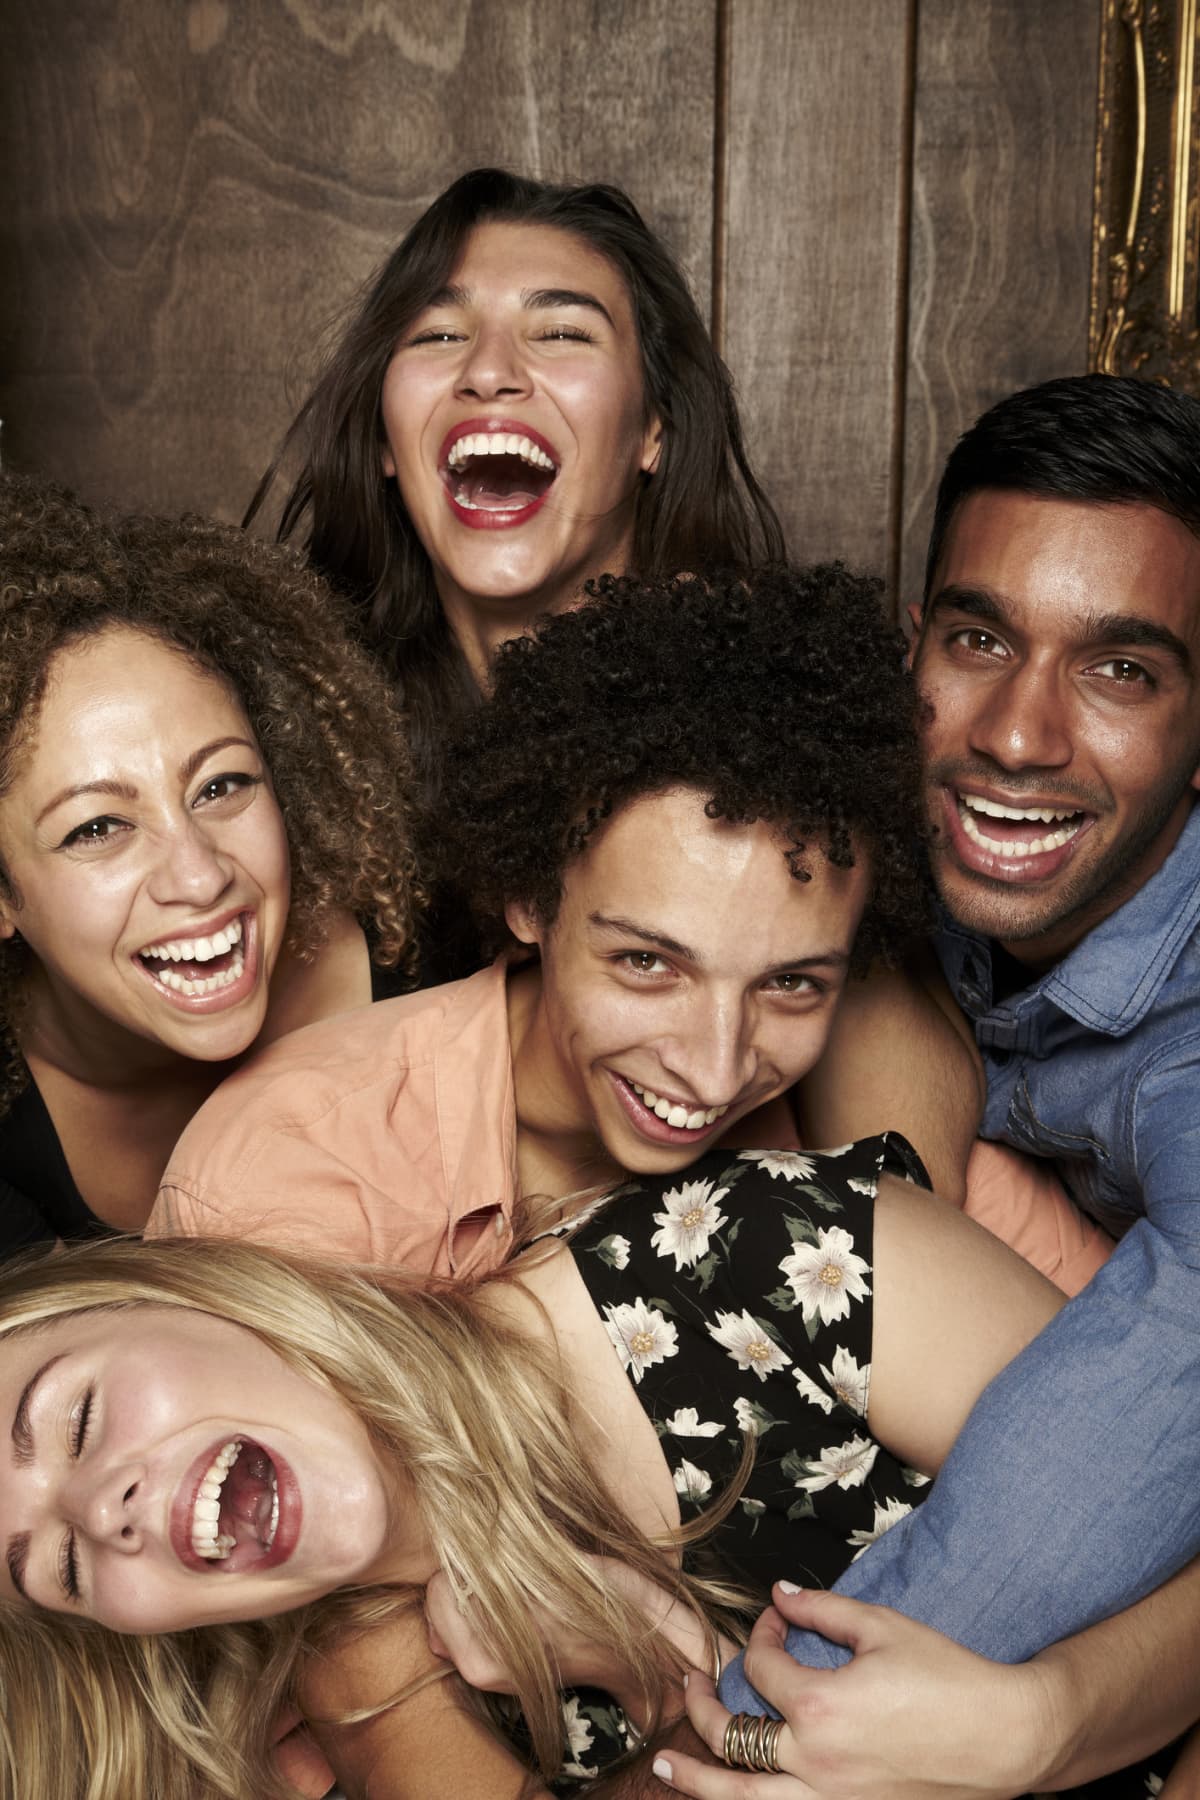 Group of people laughing while posing for a crowded selfie